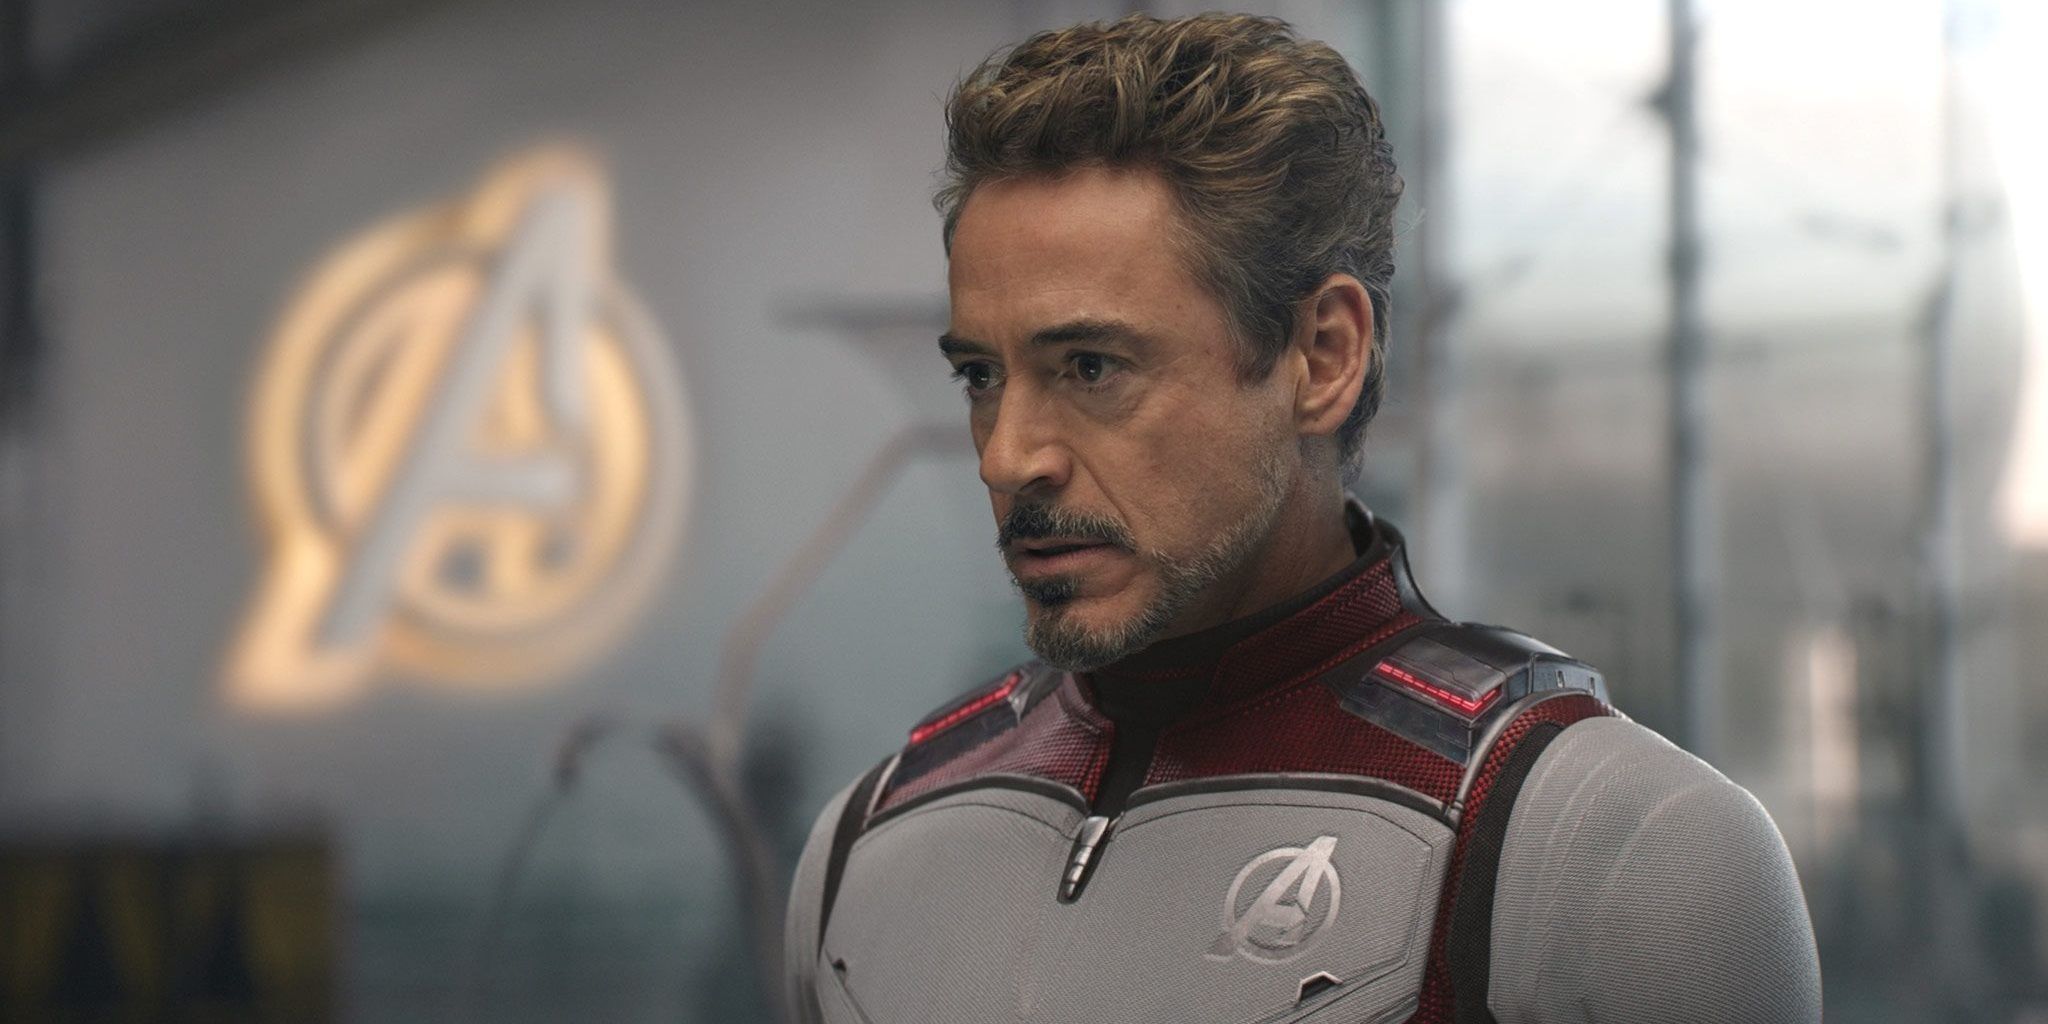 Iron Man Why The MCU Shouldnt Bring Back Robert Downey Jr (& 5 Ways It Could Work)